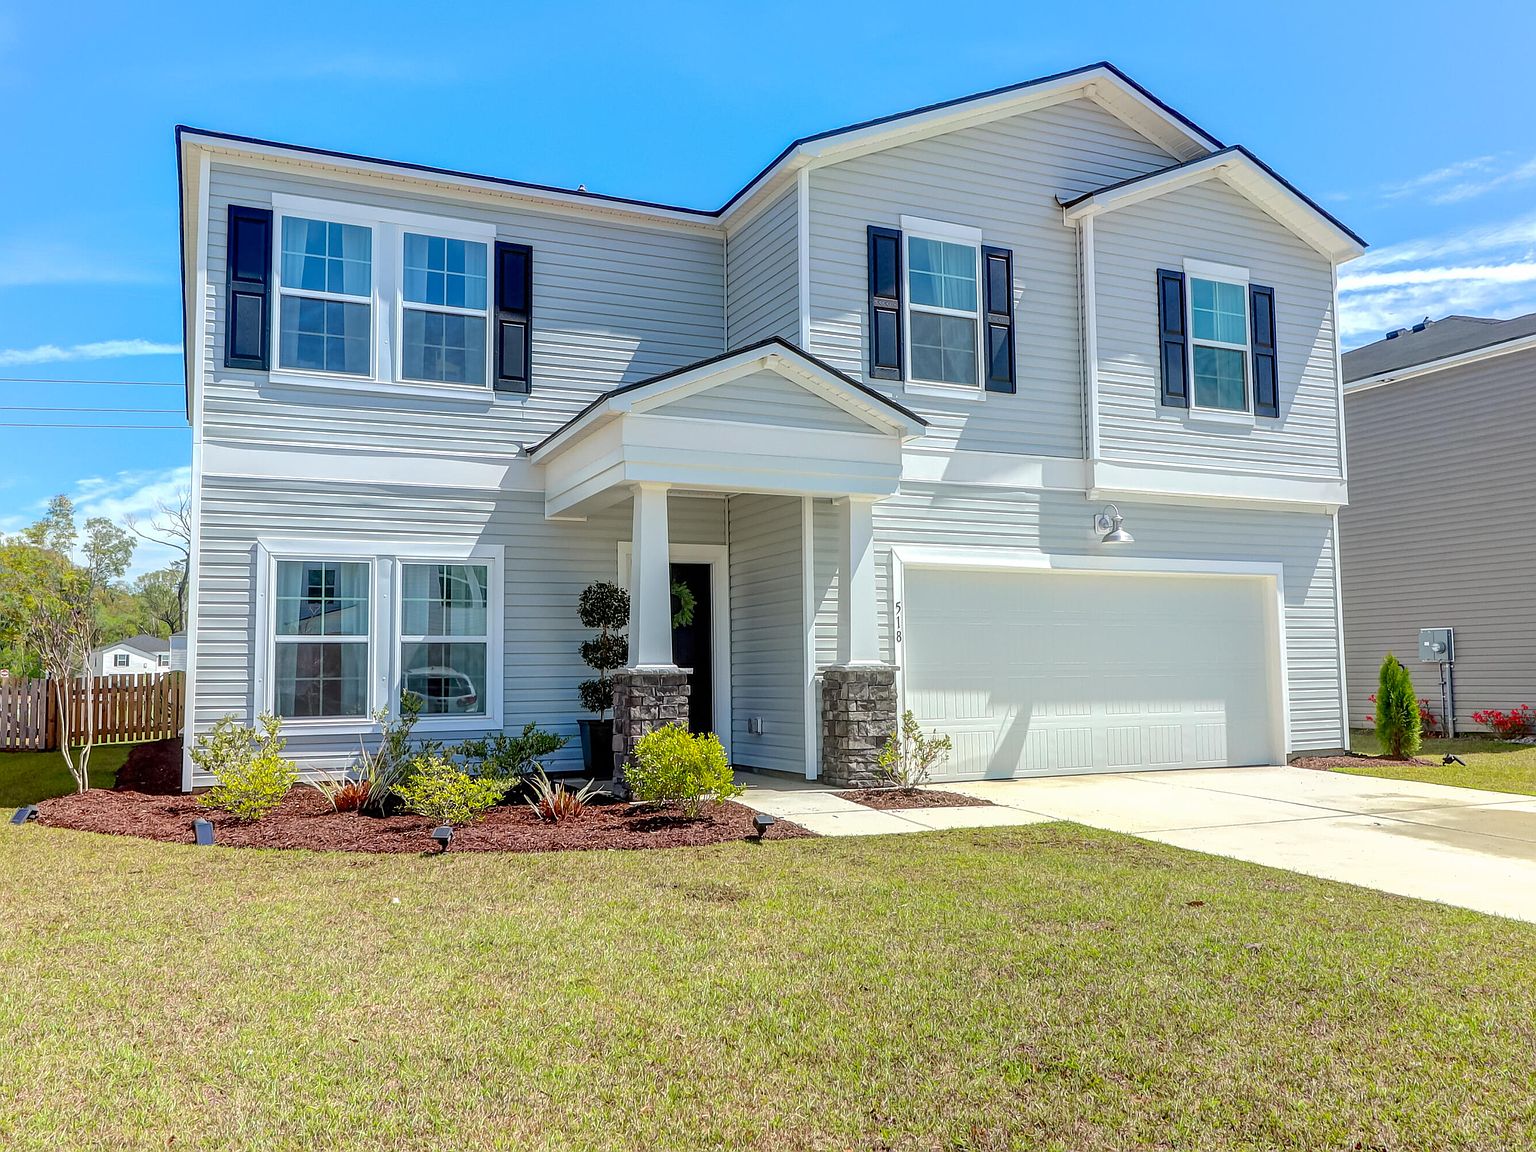 518 Merrywood Dr, Charleston, SC 29414 | Zillow